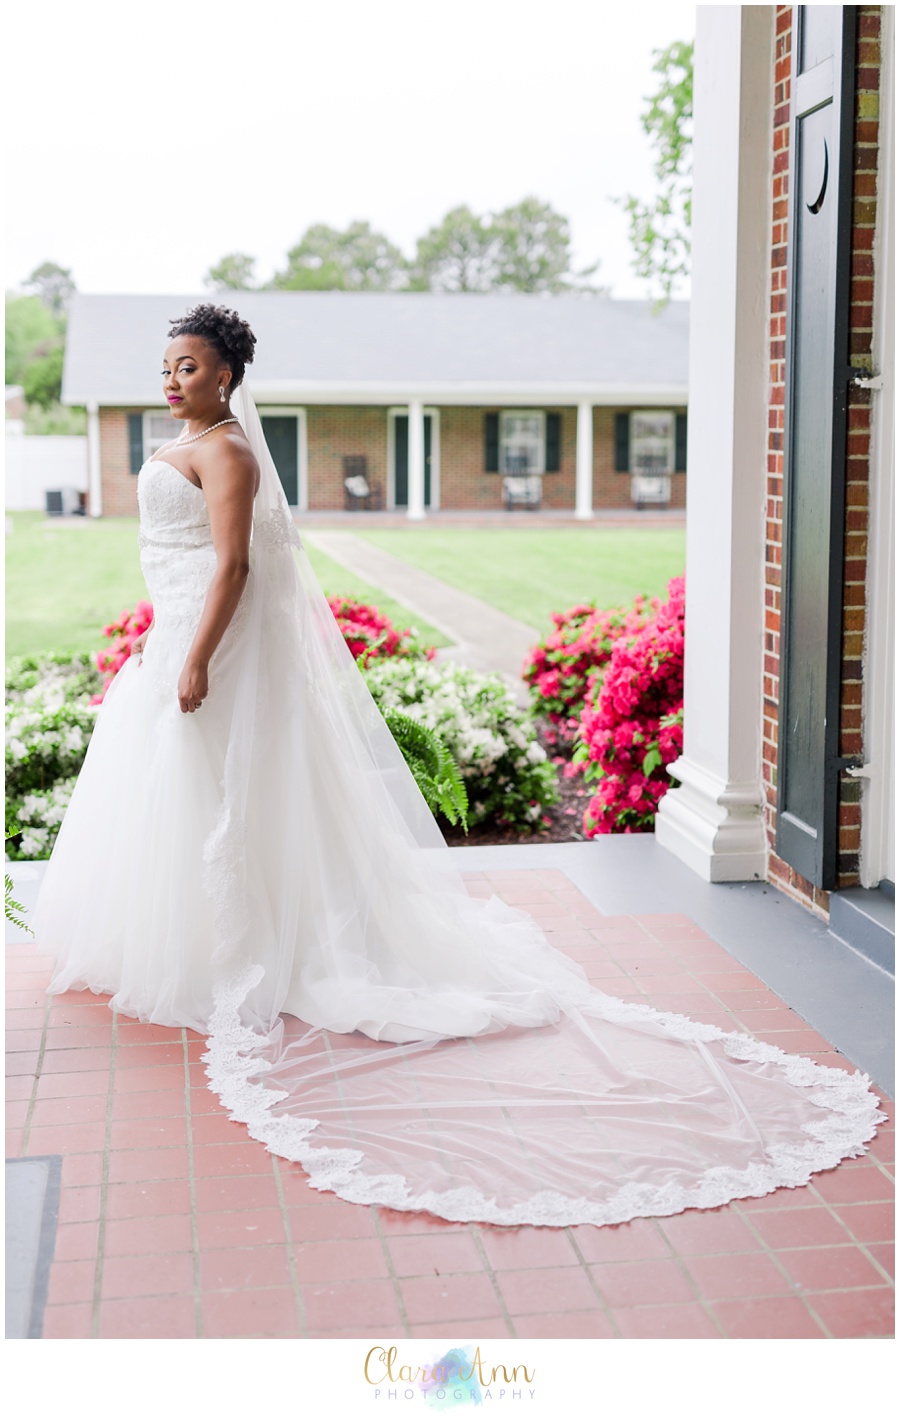 5 Reasons to do a Bridal Session